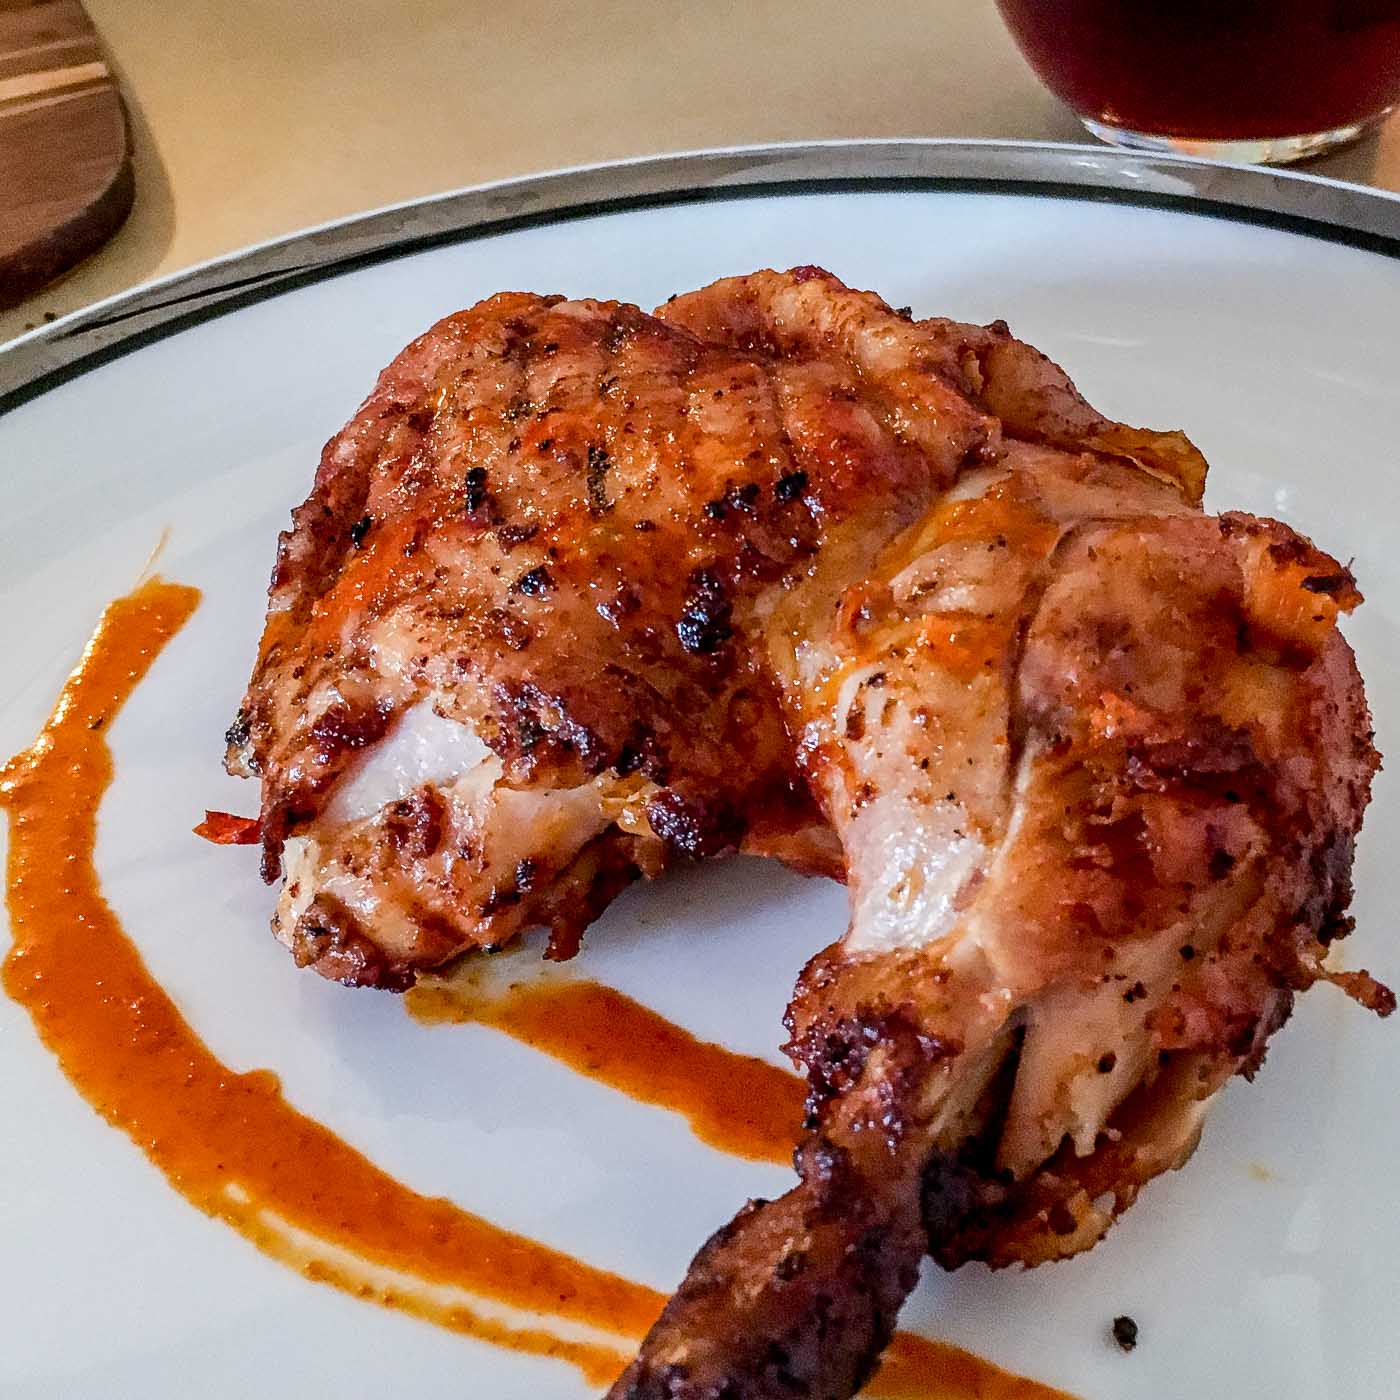 Mozambique: Piri piri Chicken - spicy and flavorful in all the right